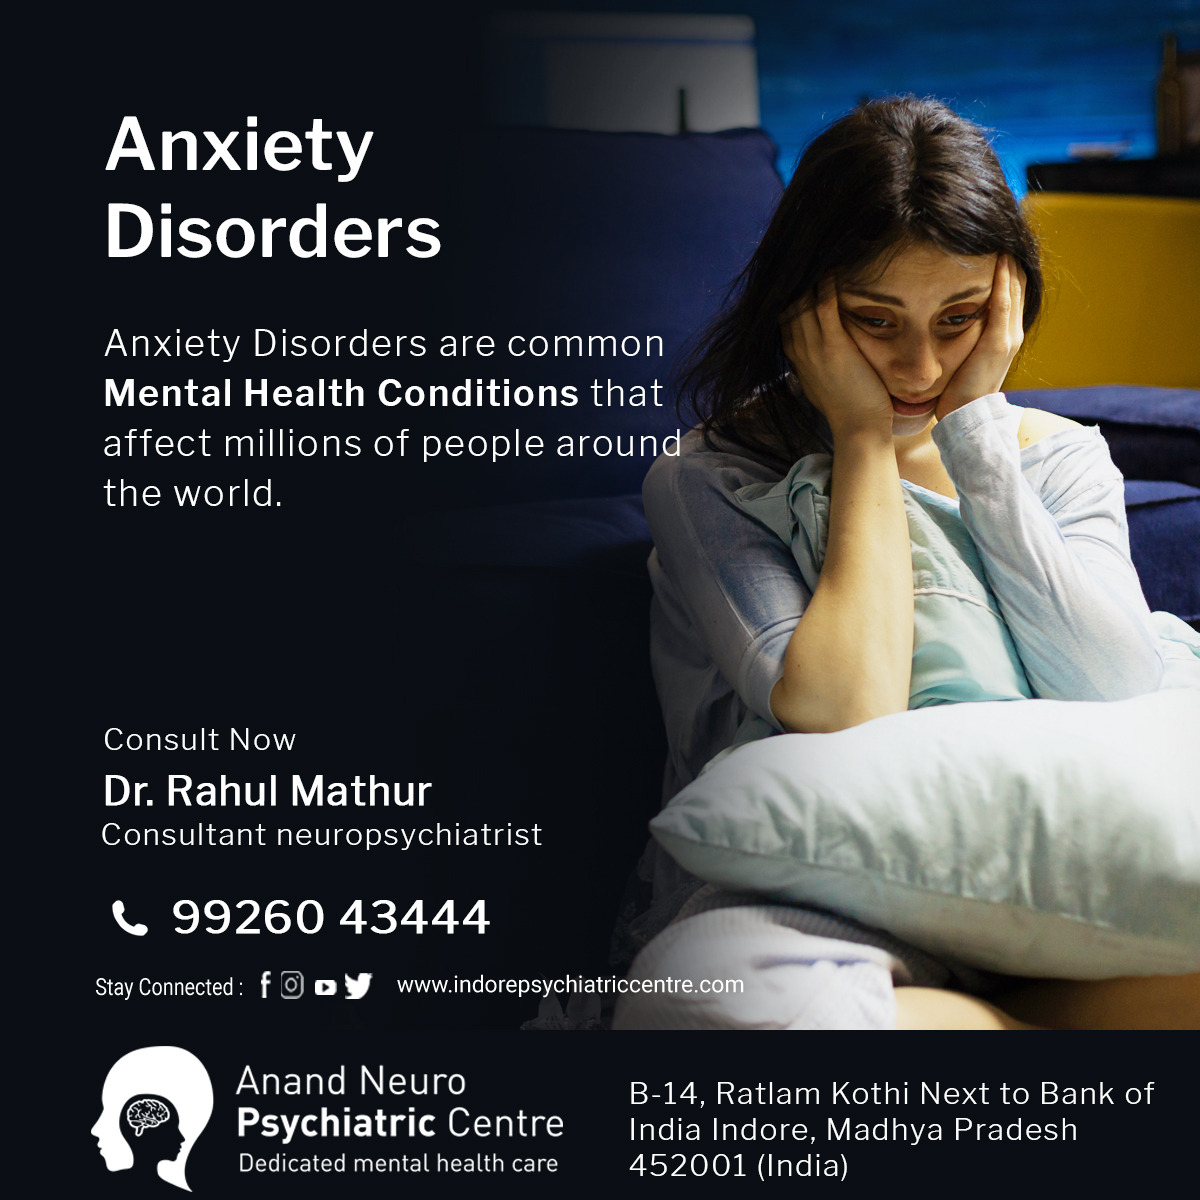 Anxiety Disorders, Causes, Treatment - Indore Psychiatric Centre